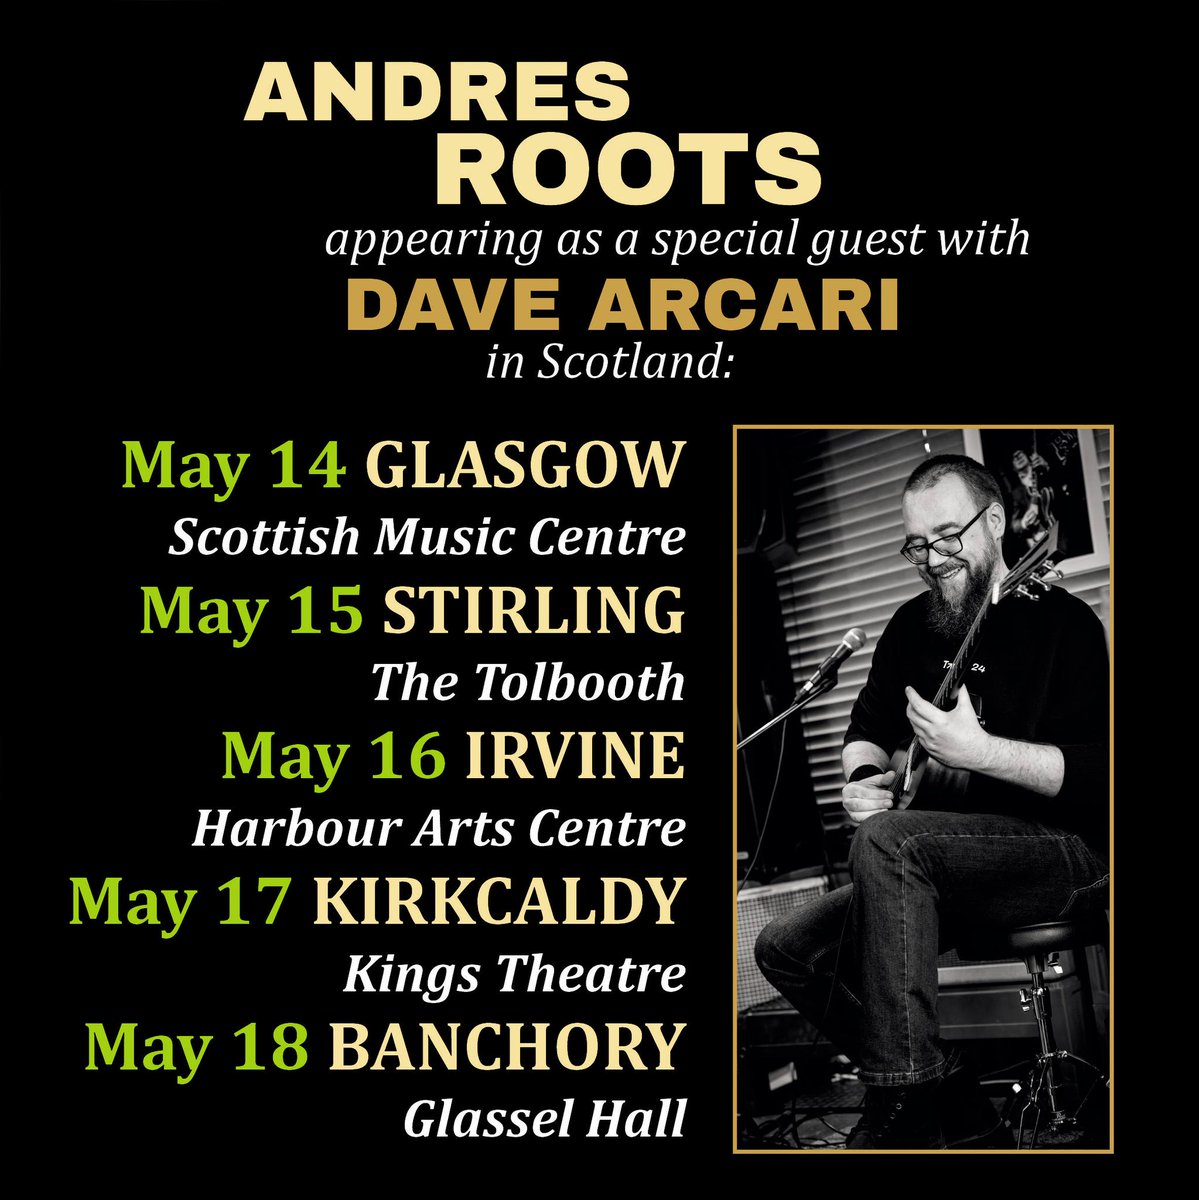 14 May at ours @scottishmusic @davearcari & longtime collaborator Andres Roots discuss International touring followed by a TOUR 15 May @Tolbooth 16 @HACIrvine 17 Kings Theatre & 18 Glassel Hall tickets visit ➡ davearcari.com/tour-dates/